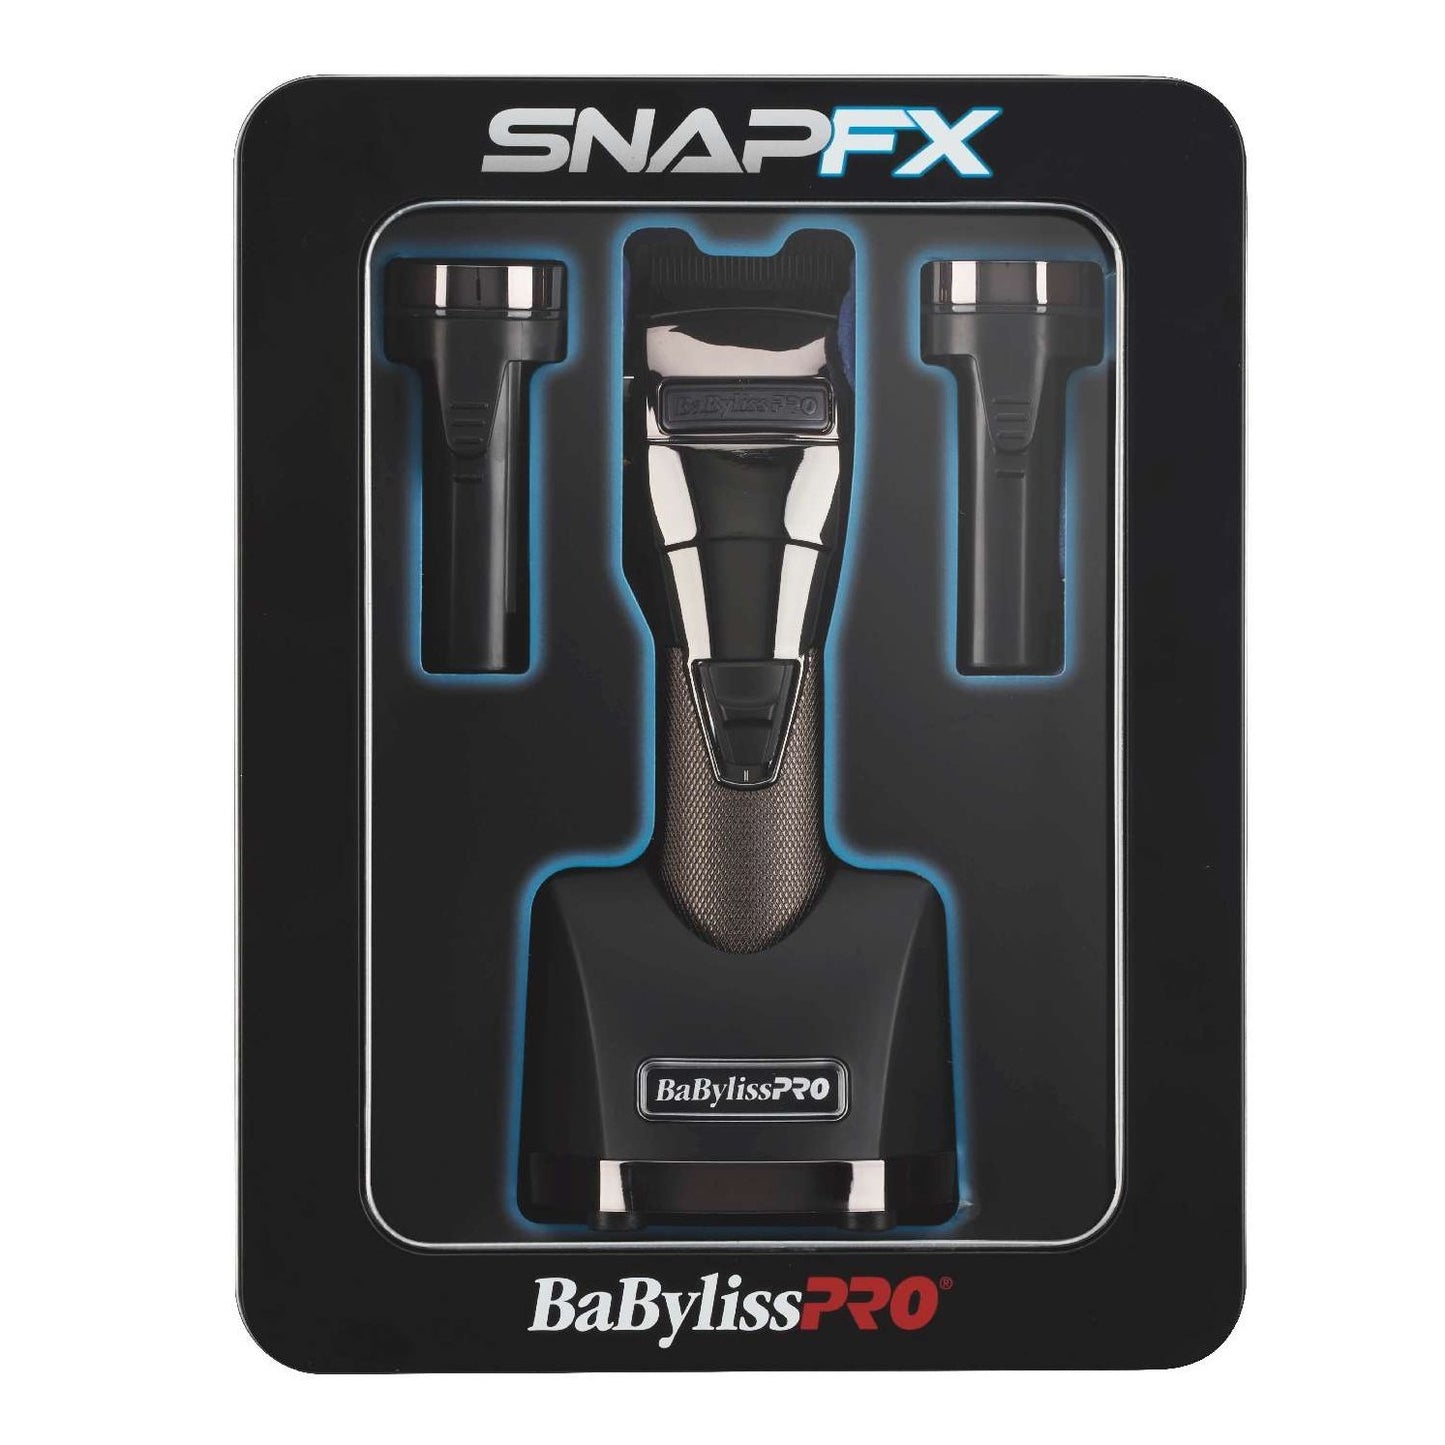 Babylisspro Snapfx Snap Inout Dual Liyhium Battery Clipper